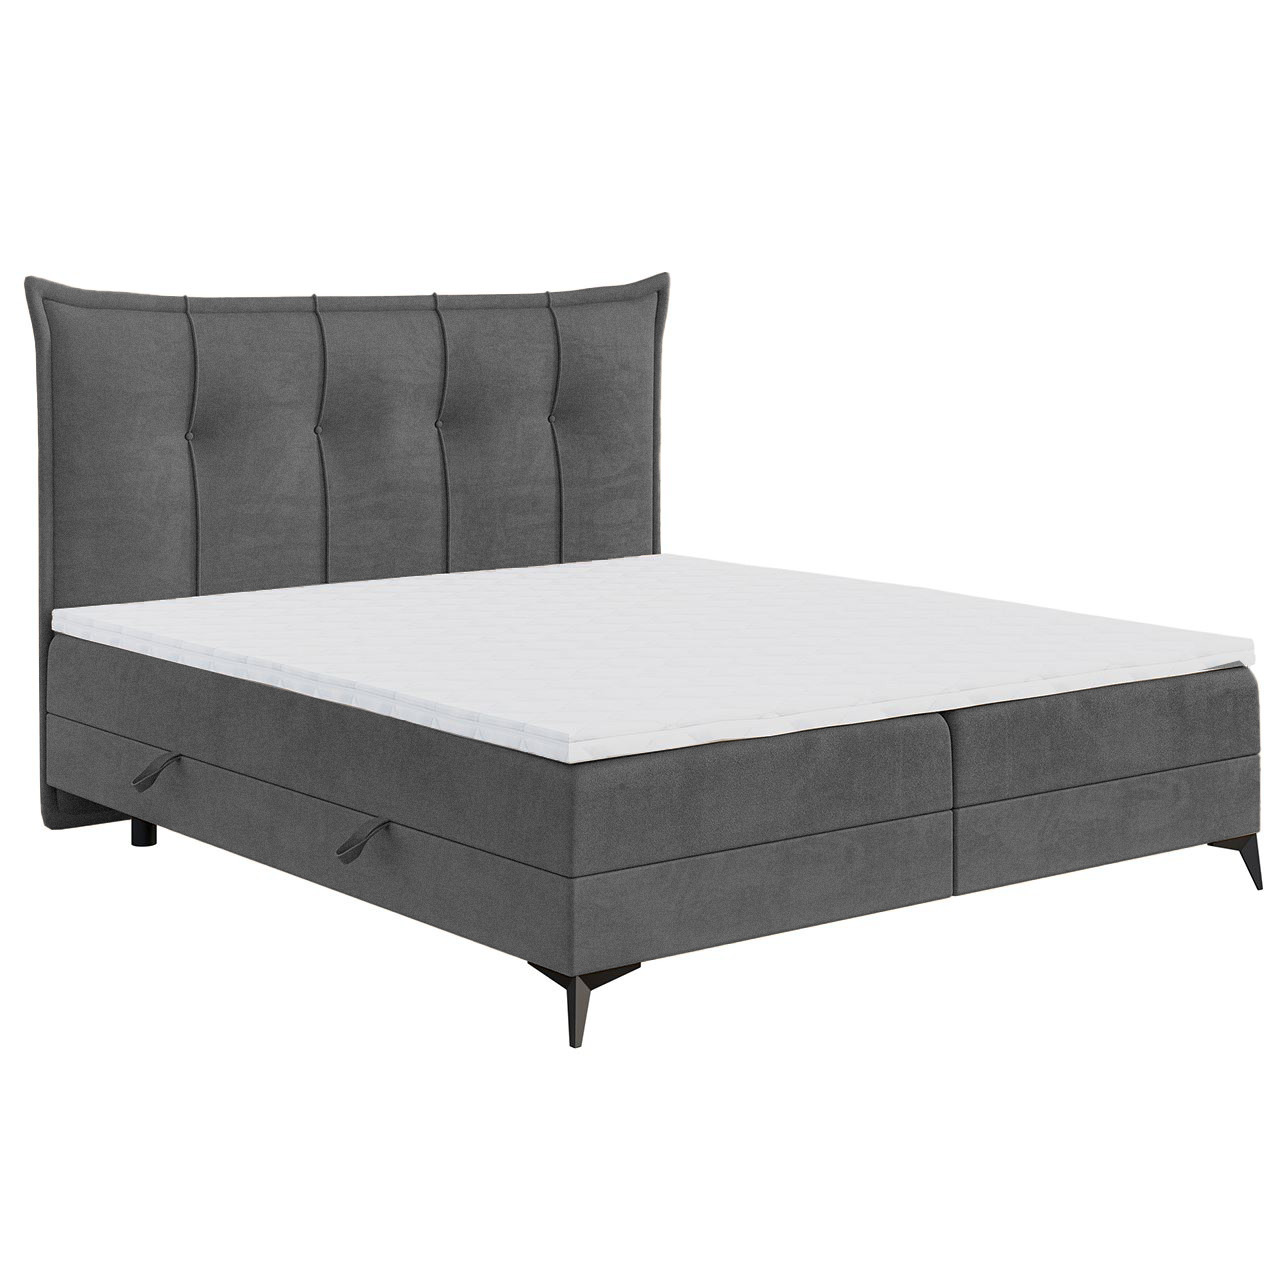 Upholstered bed FOX 160x200 monolith 92